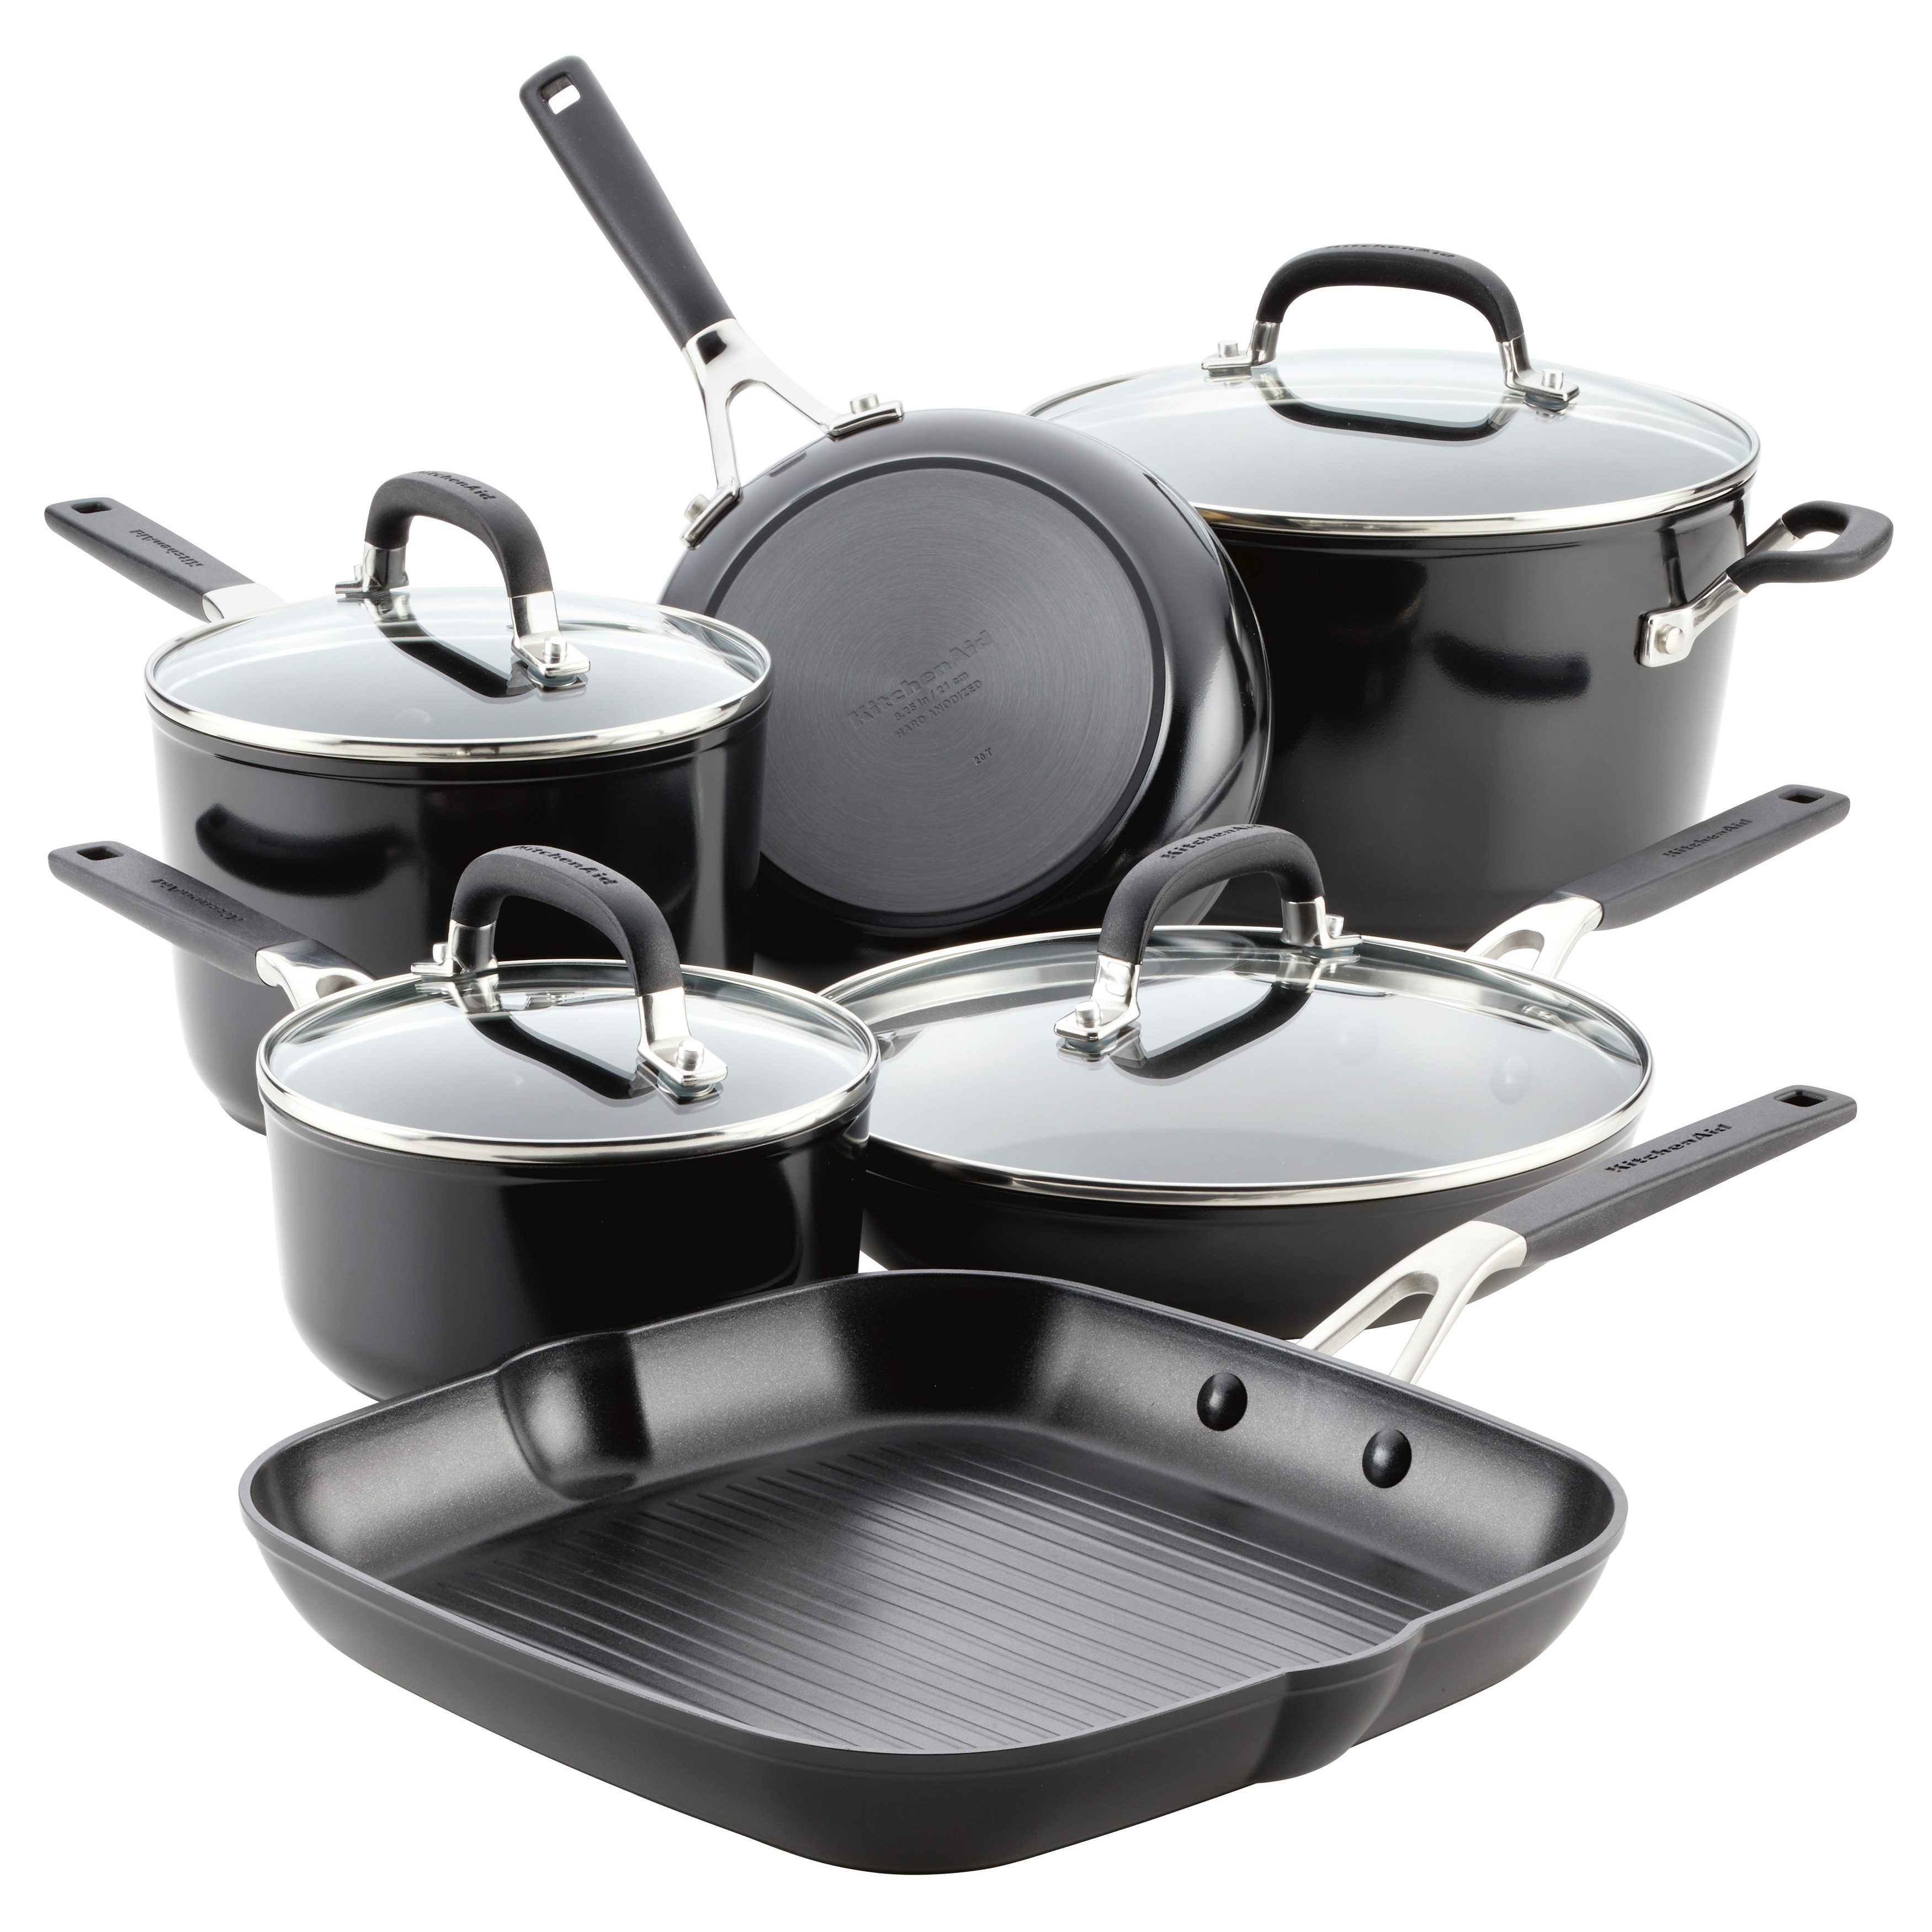 https://ak1.ostkcdn.com/images/products/is/images/direct/4b1006c3ac4ecf73916dc221fa72288e17fddaac/KitchenAid-Hard-Anodized-Nonstick-Cookware-Pots-and-Pans-Set%2C-10-Piece%2C-Onyx-Black.jpg